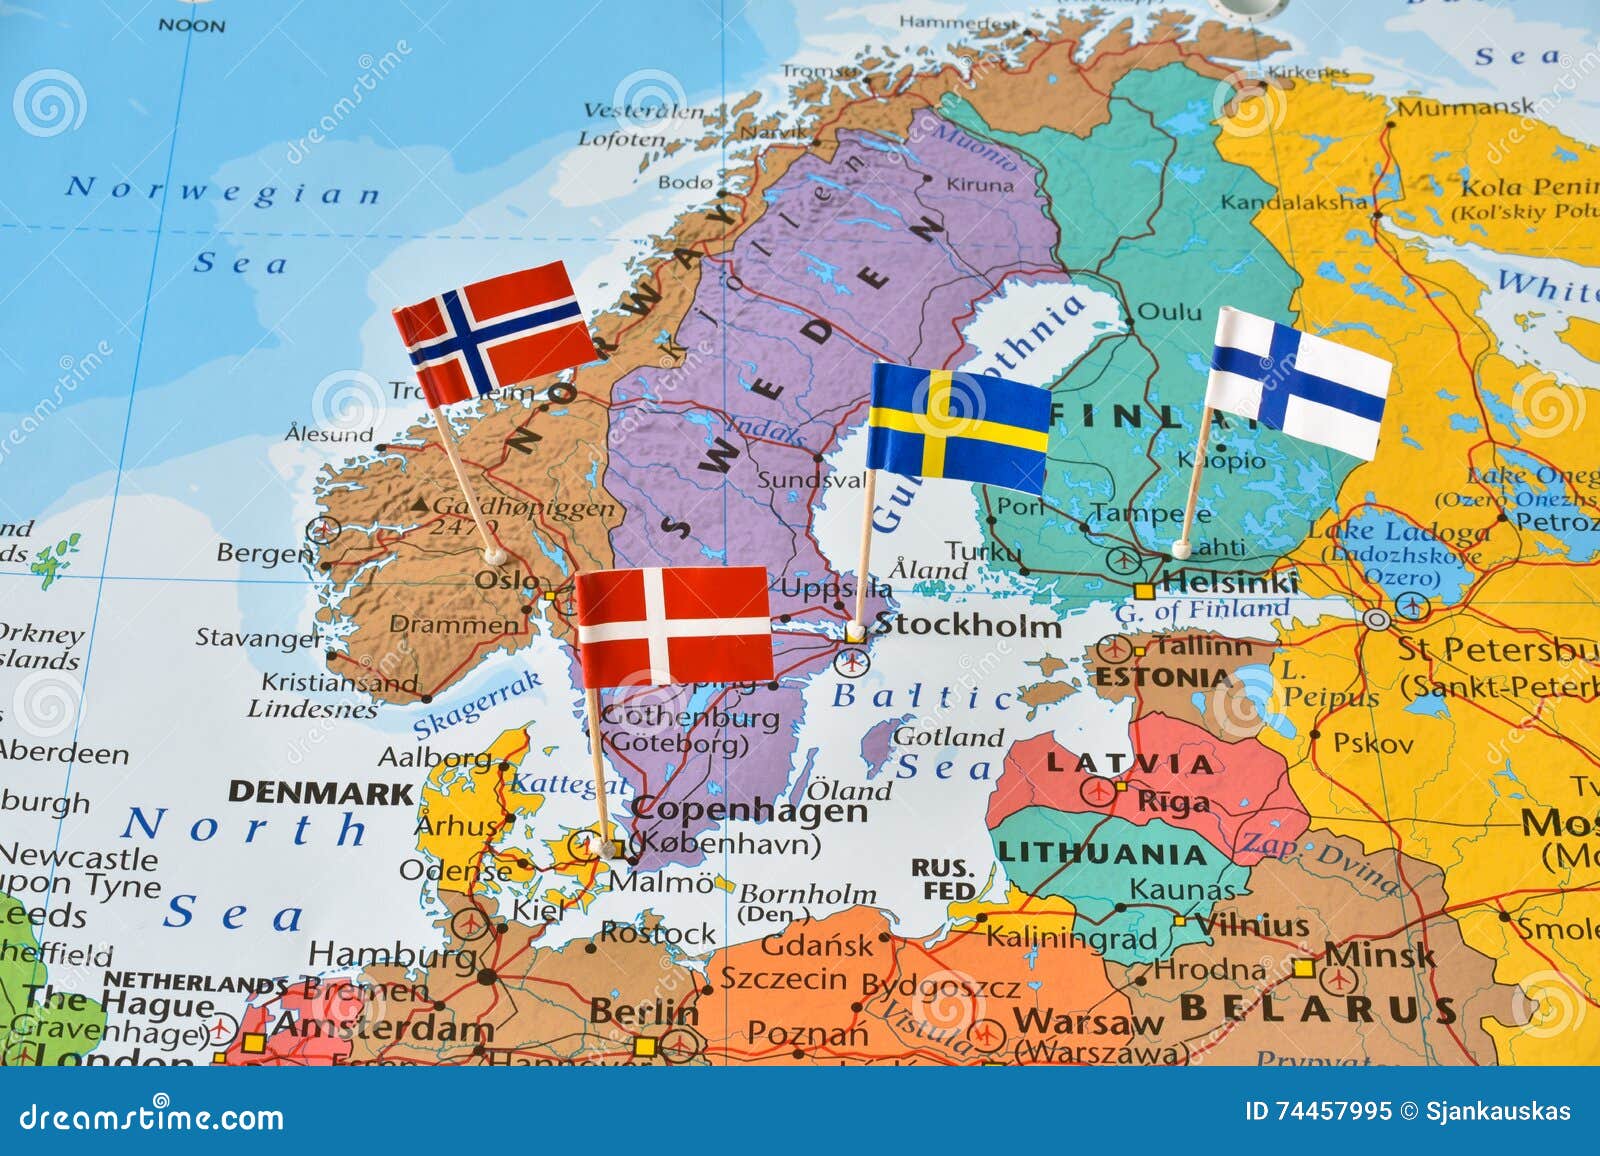 nordic countries flag pins on map